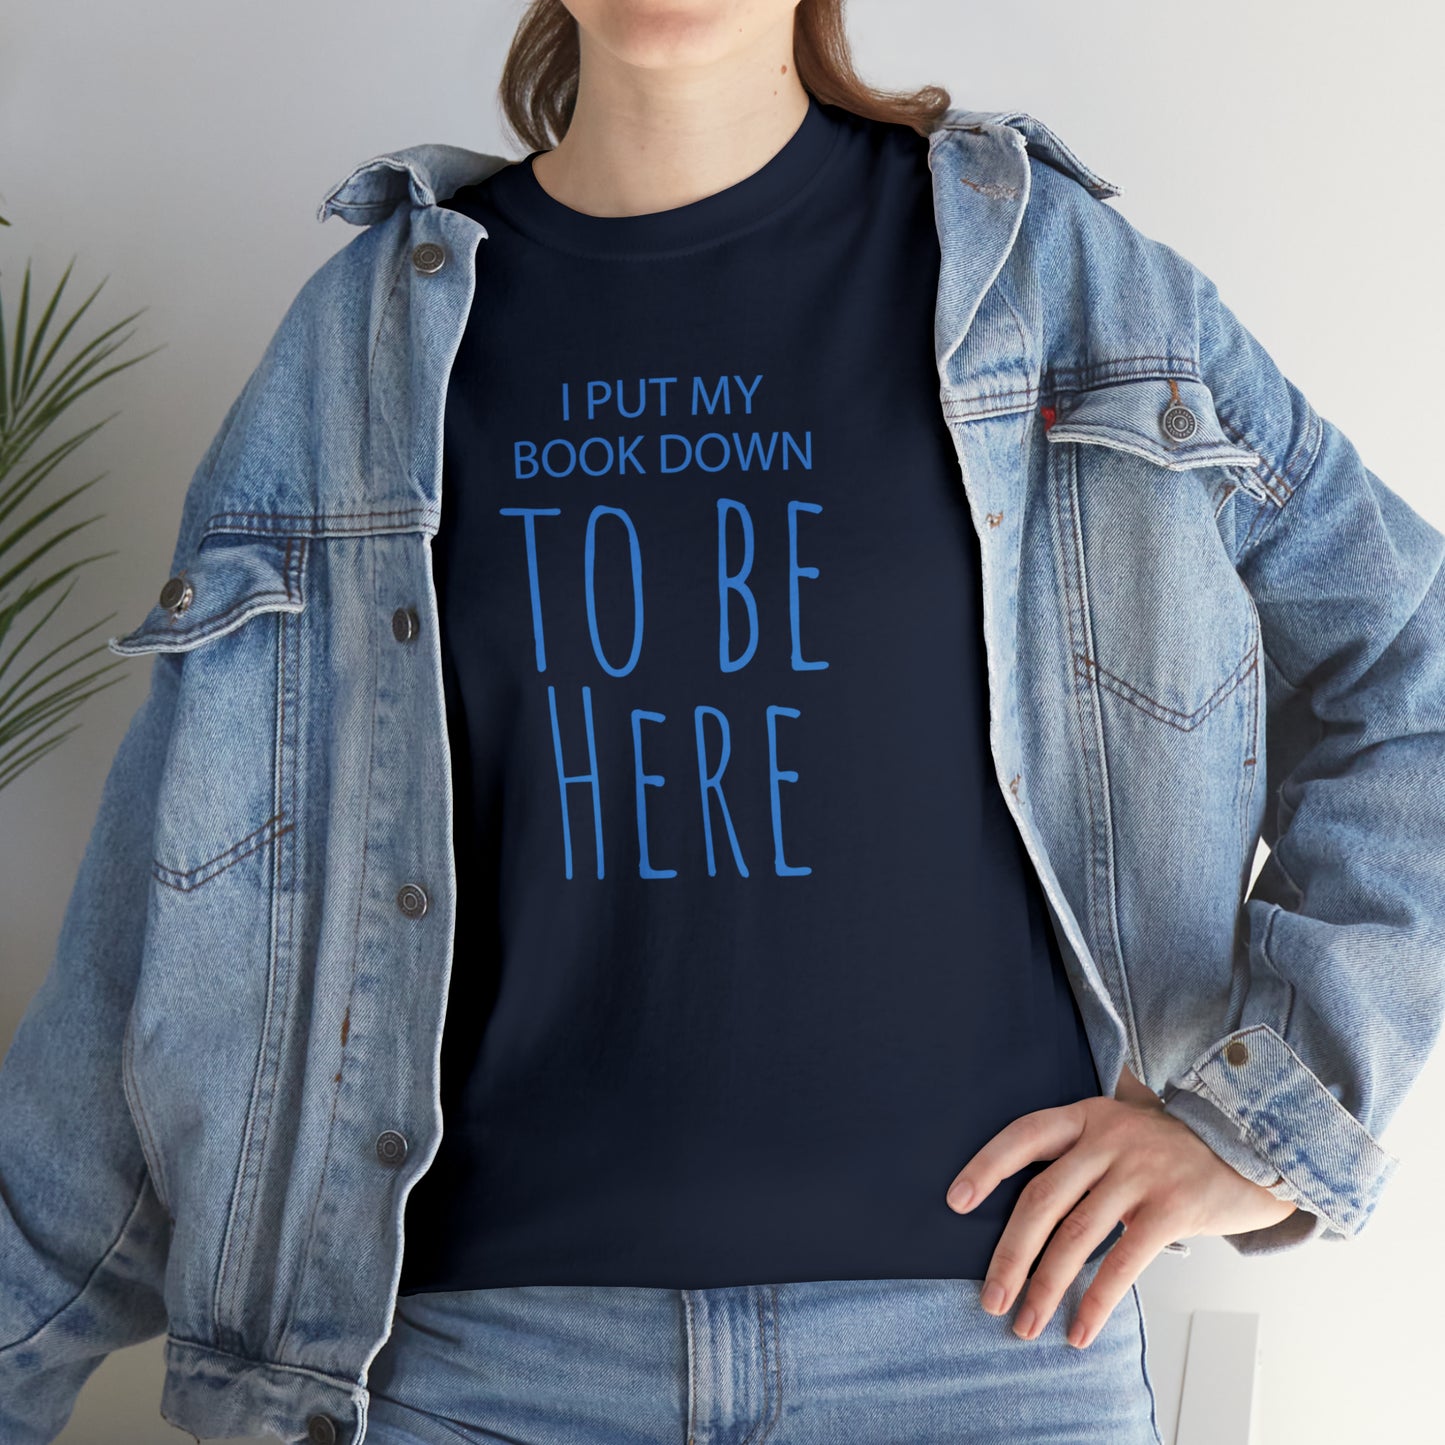 To Be Here - Cotton Tee